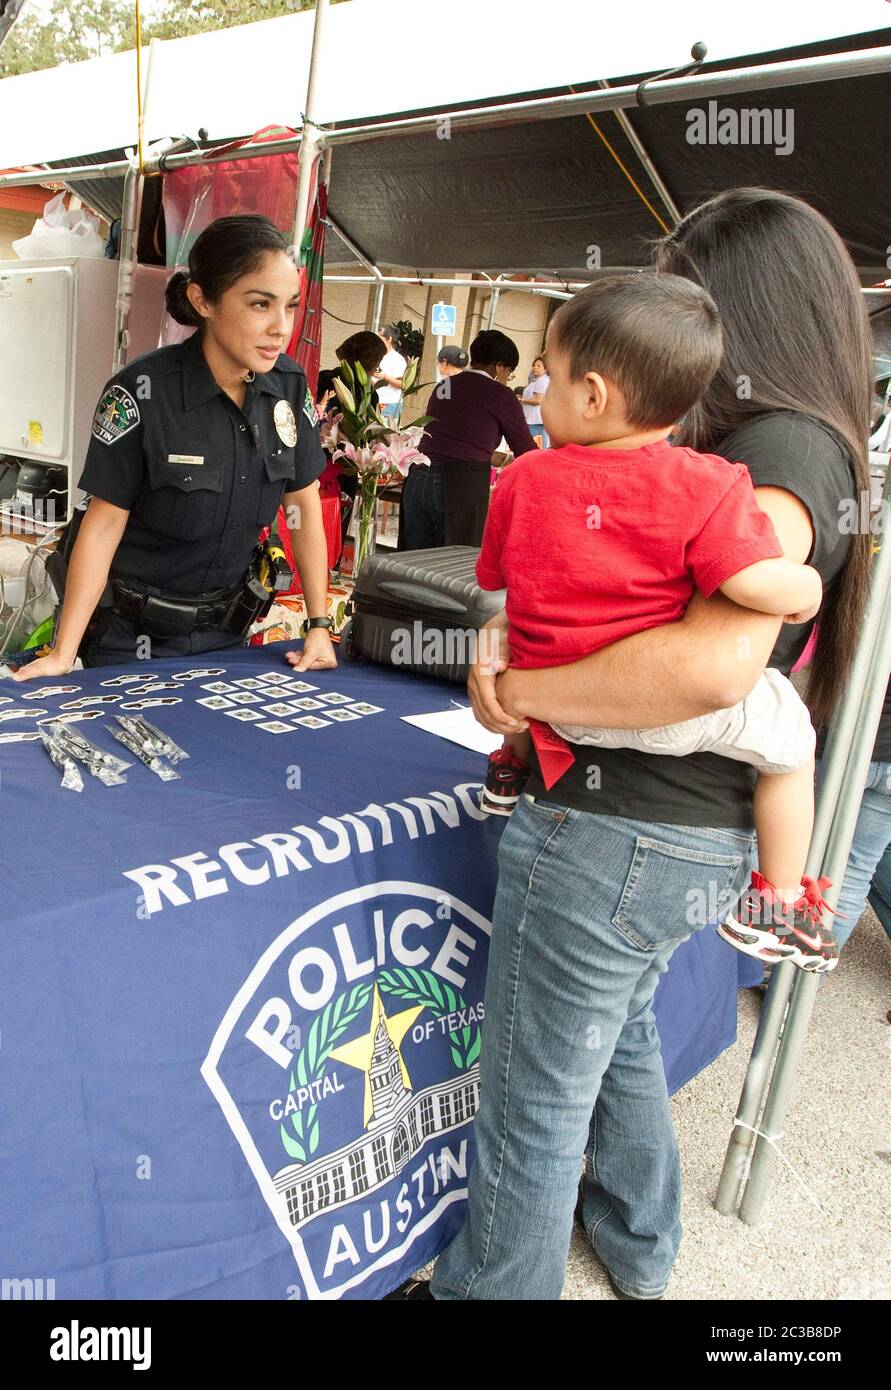 Austin, Texas USA, October 6, 2012: Female Hispanic police officer talks to visitors at a recruiting booth for the Austin Police Department during a church festival. ©MKC / Daemmrich Photos Stock Photo